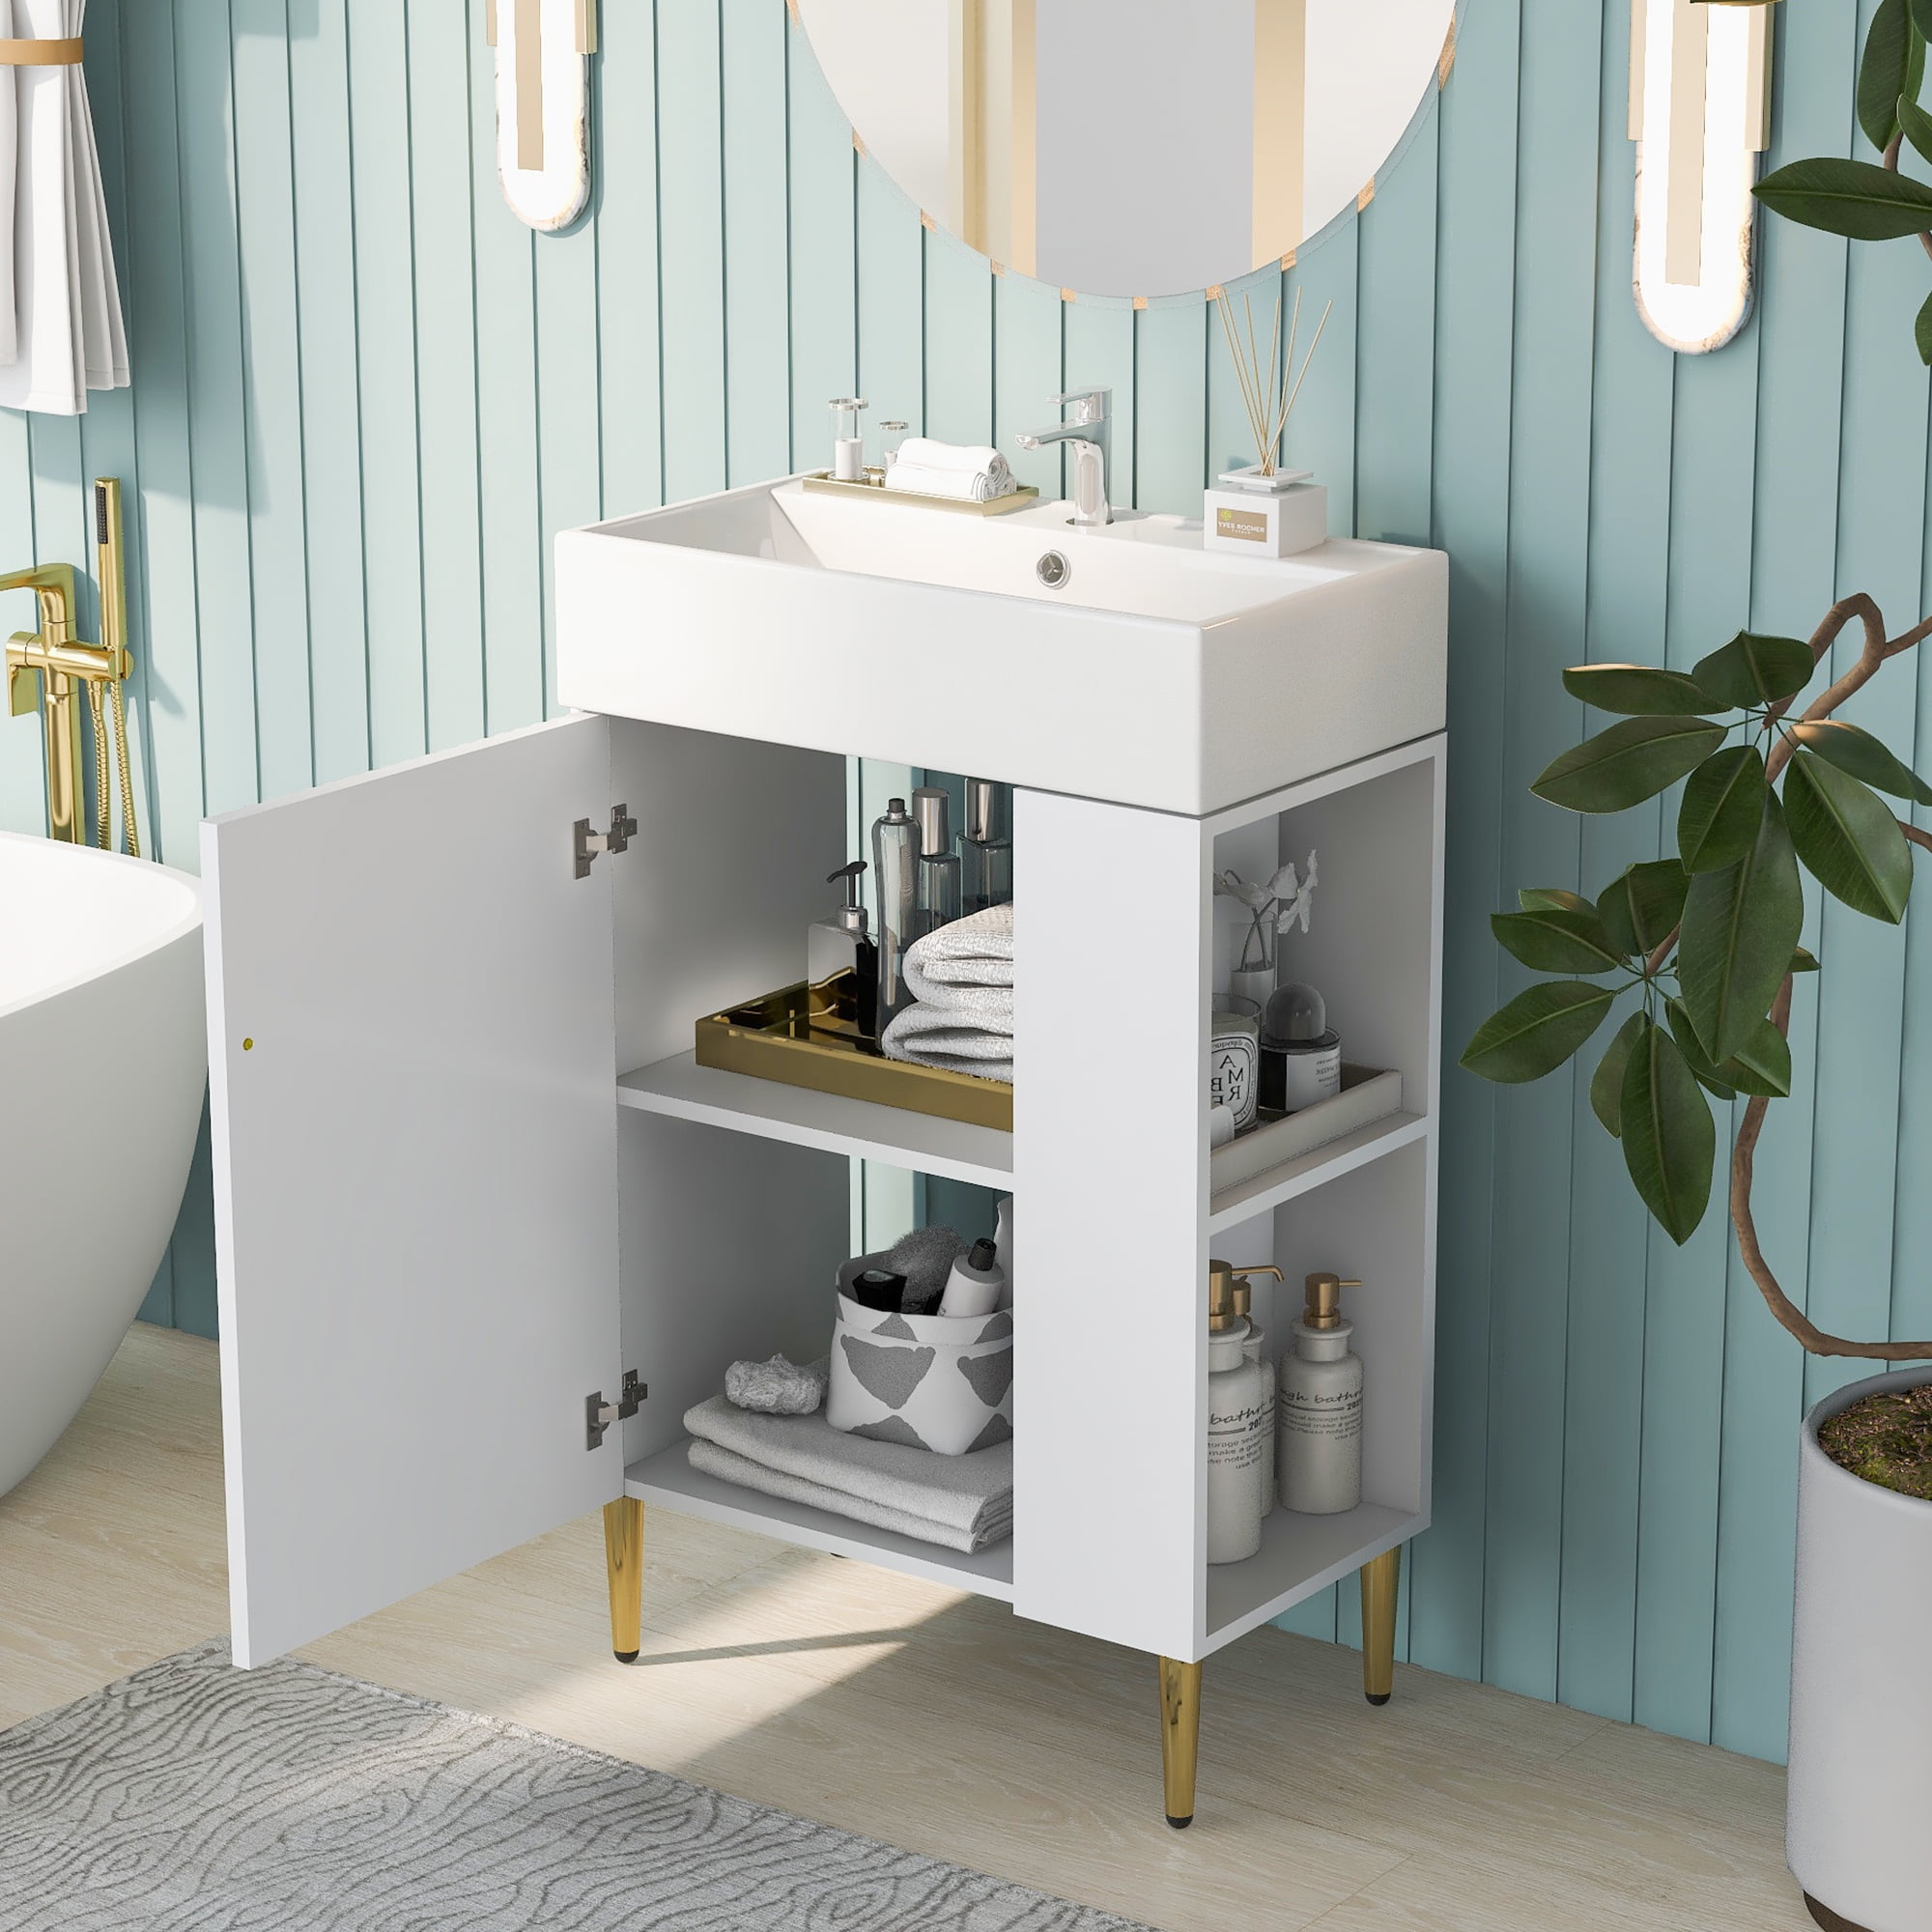 Churanty 36 Bathroom Cabinet Vanity with Sink Combo, White Bathroom  Storage Cabinet with 3 Drawers and Two Doors, Solid Wood Frame and MDF Board